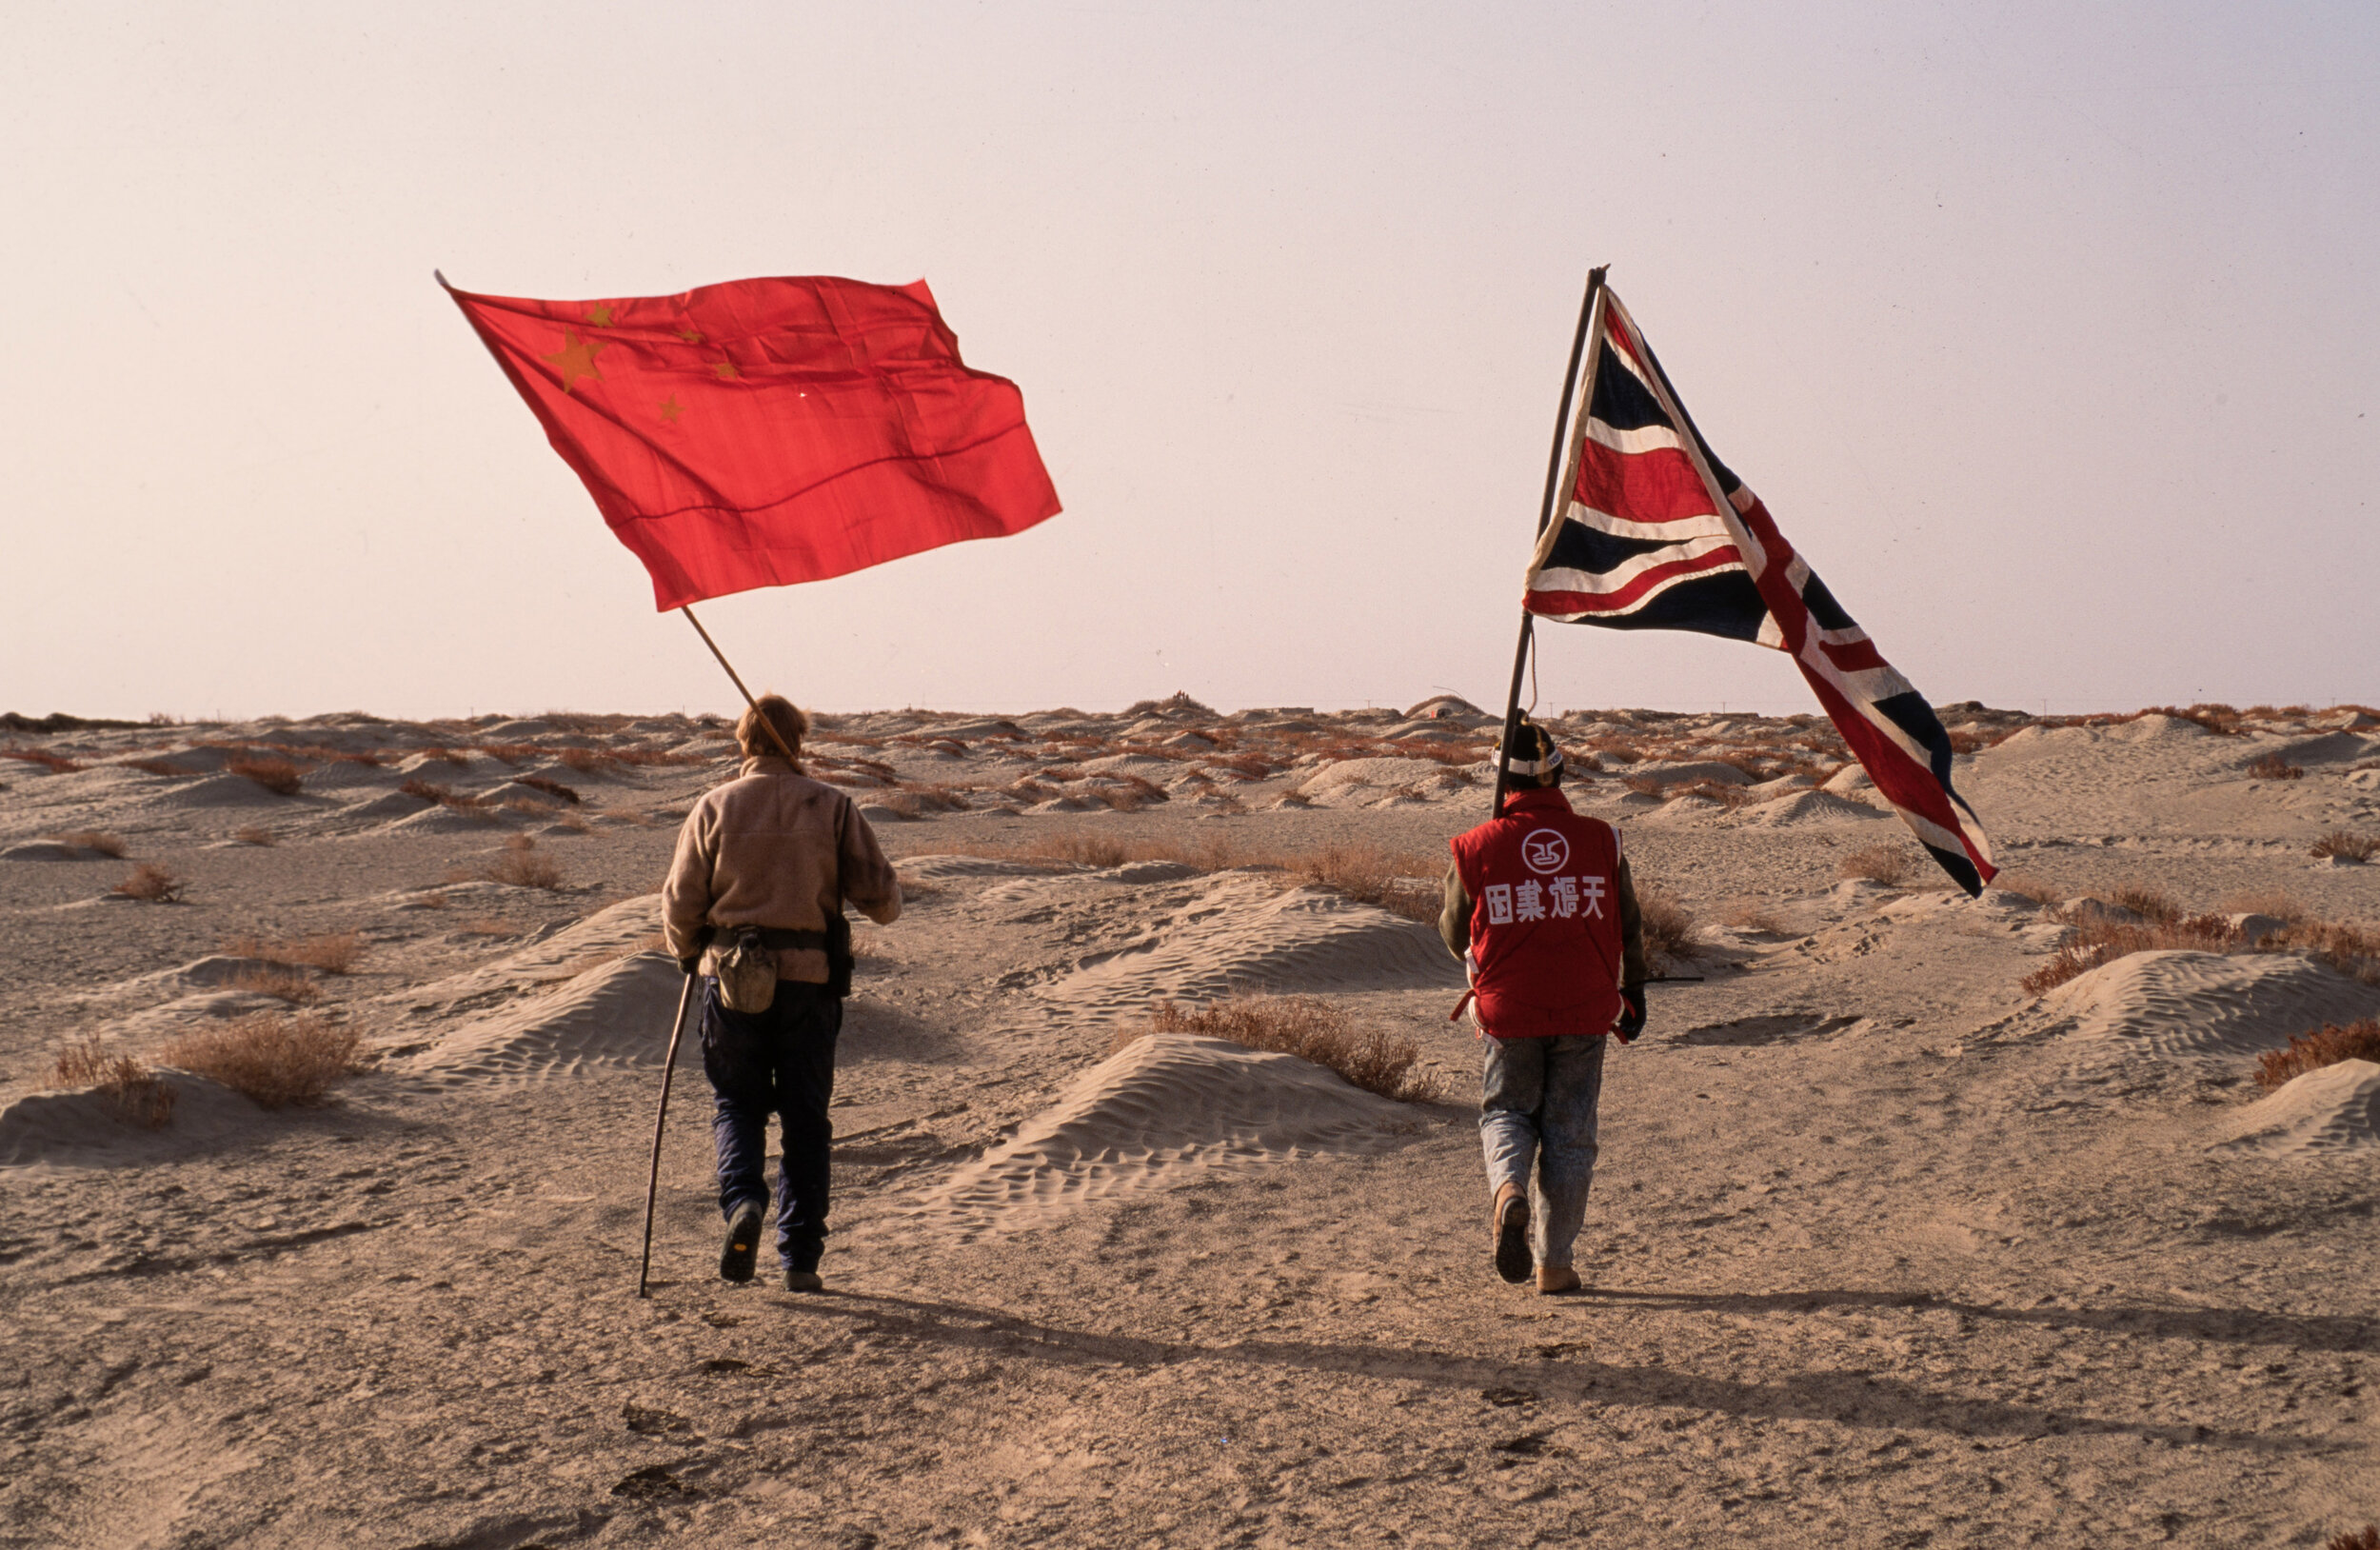  After 59 days the crossing team arrives at the eastern edge of the desert. Both the Union Jack and the Chinese flags are carried the final steps of the crossing before we met with the press. 